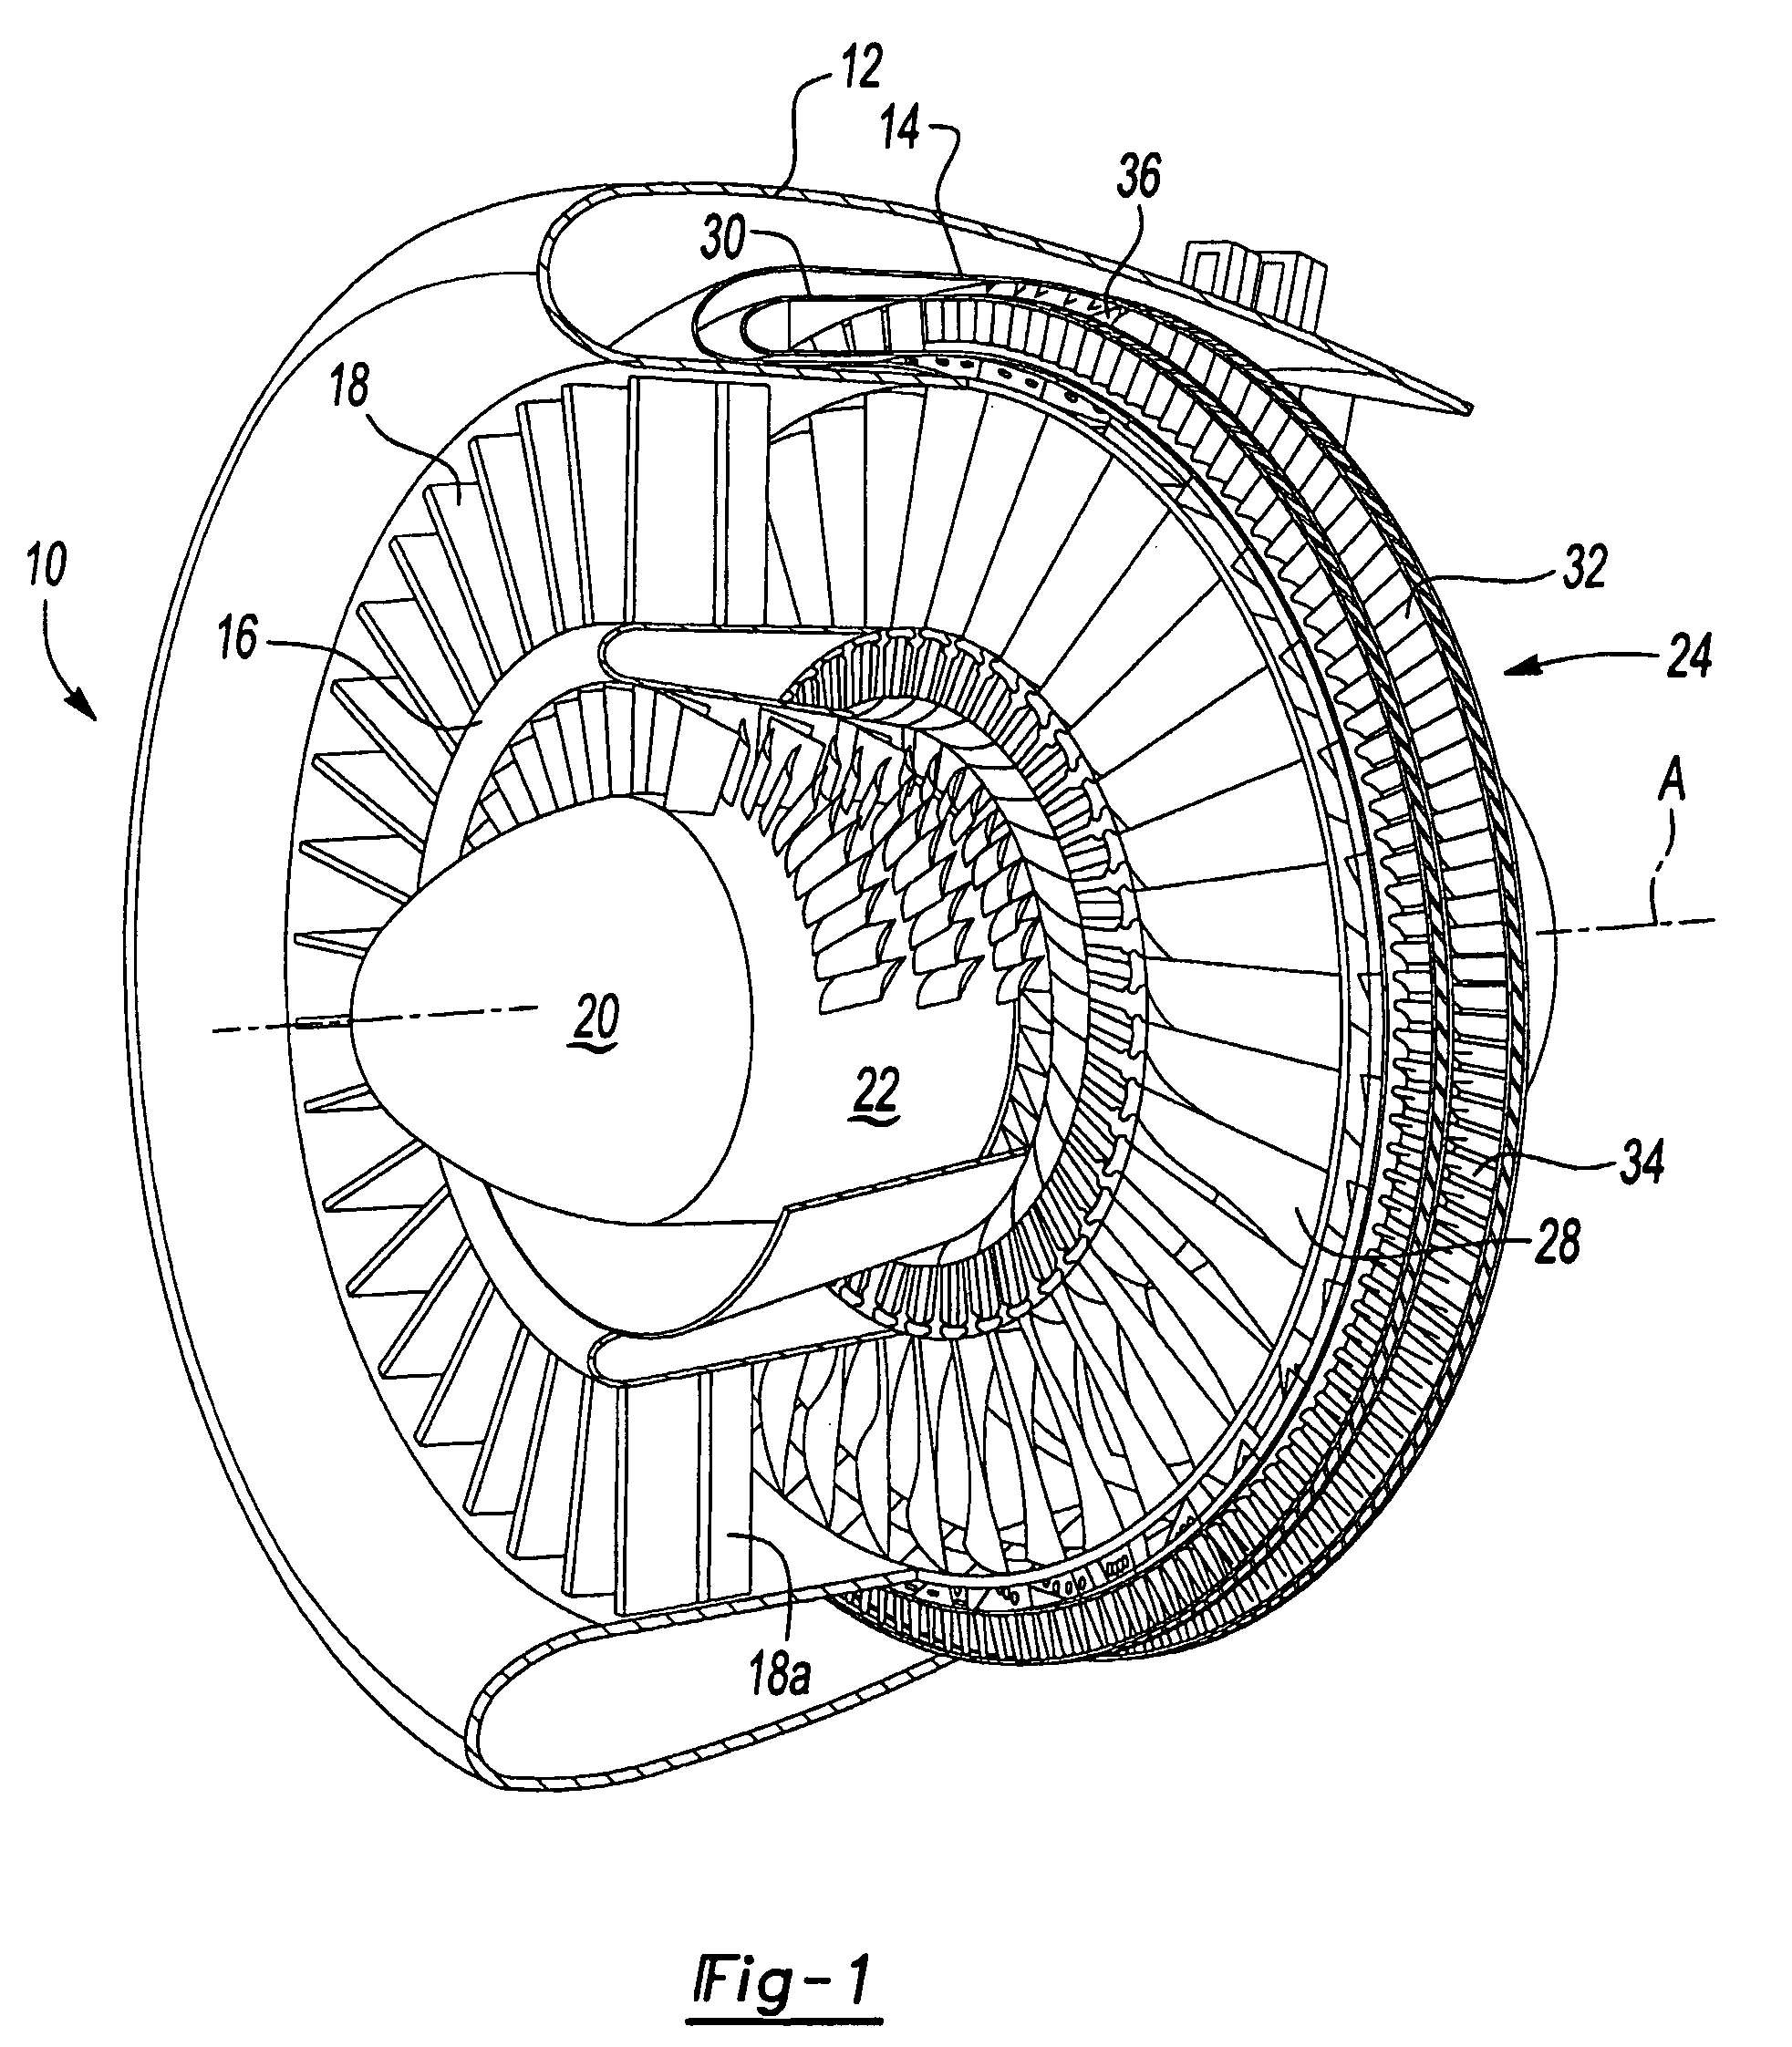 Fan blade with integral diffuser section and tip turbine blade section for a tip turbine engine